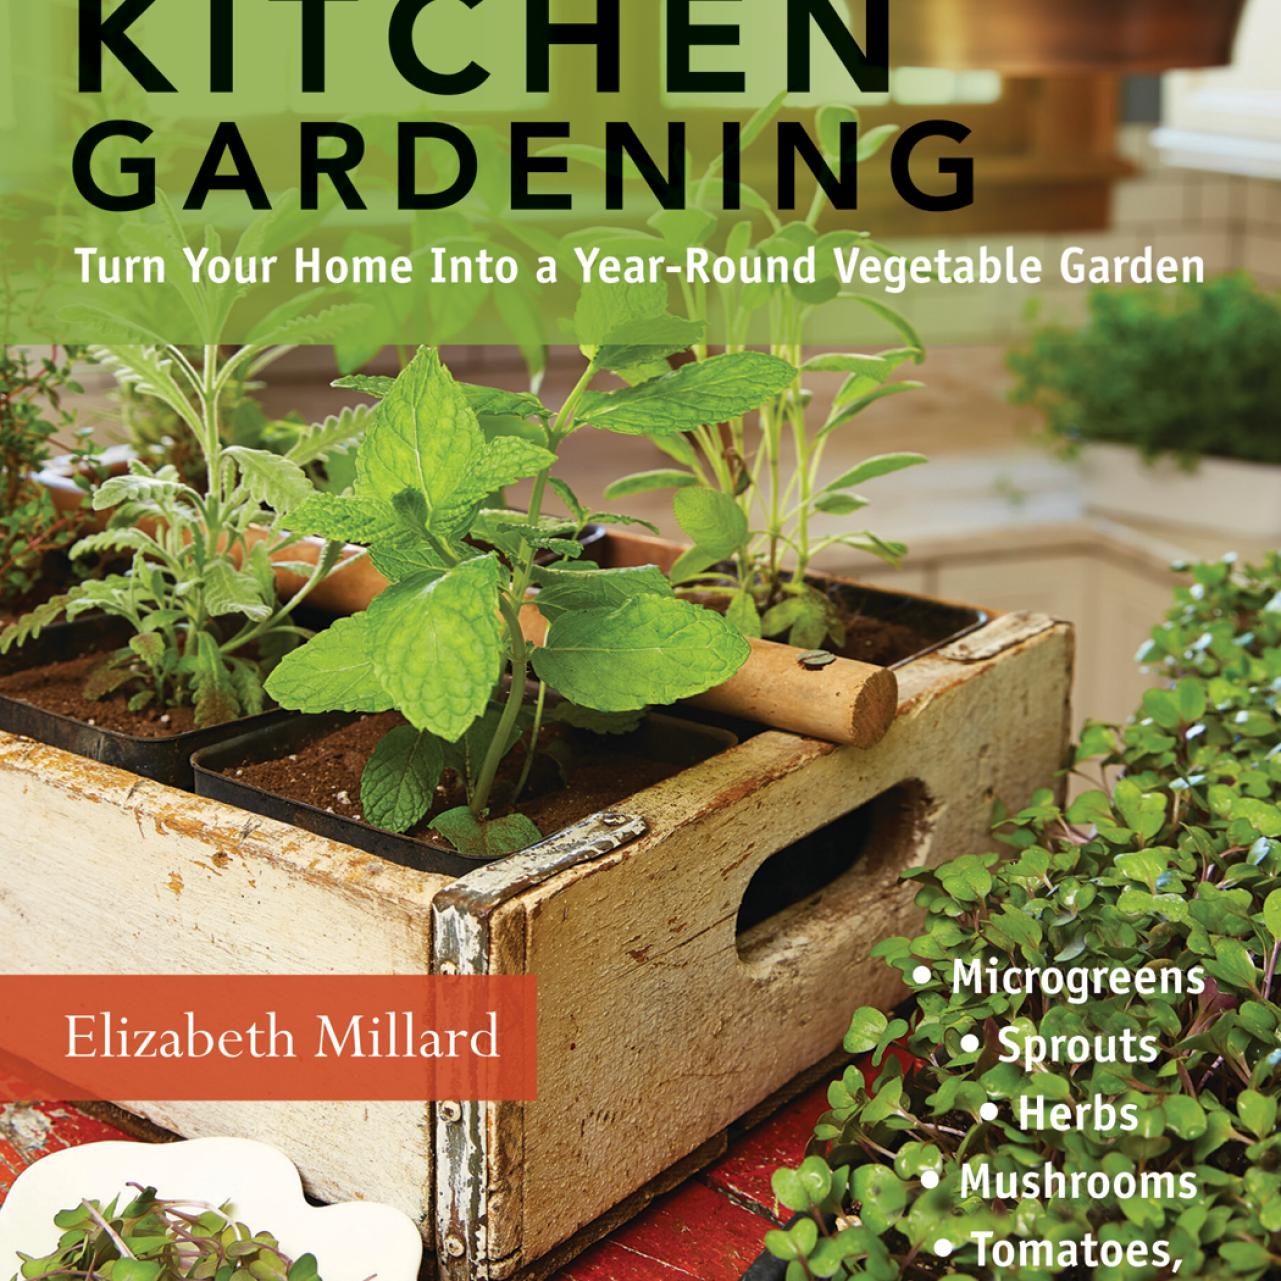 8 Edible Plants You Can Grow in Your Kitchen - Yarden